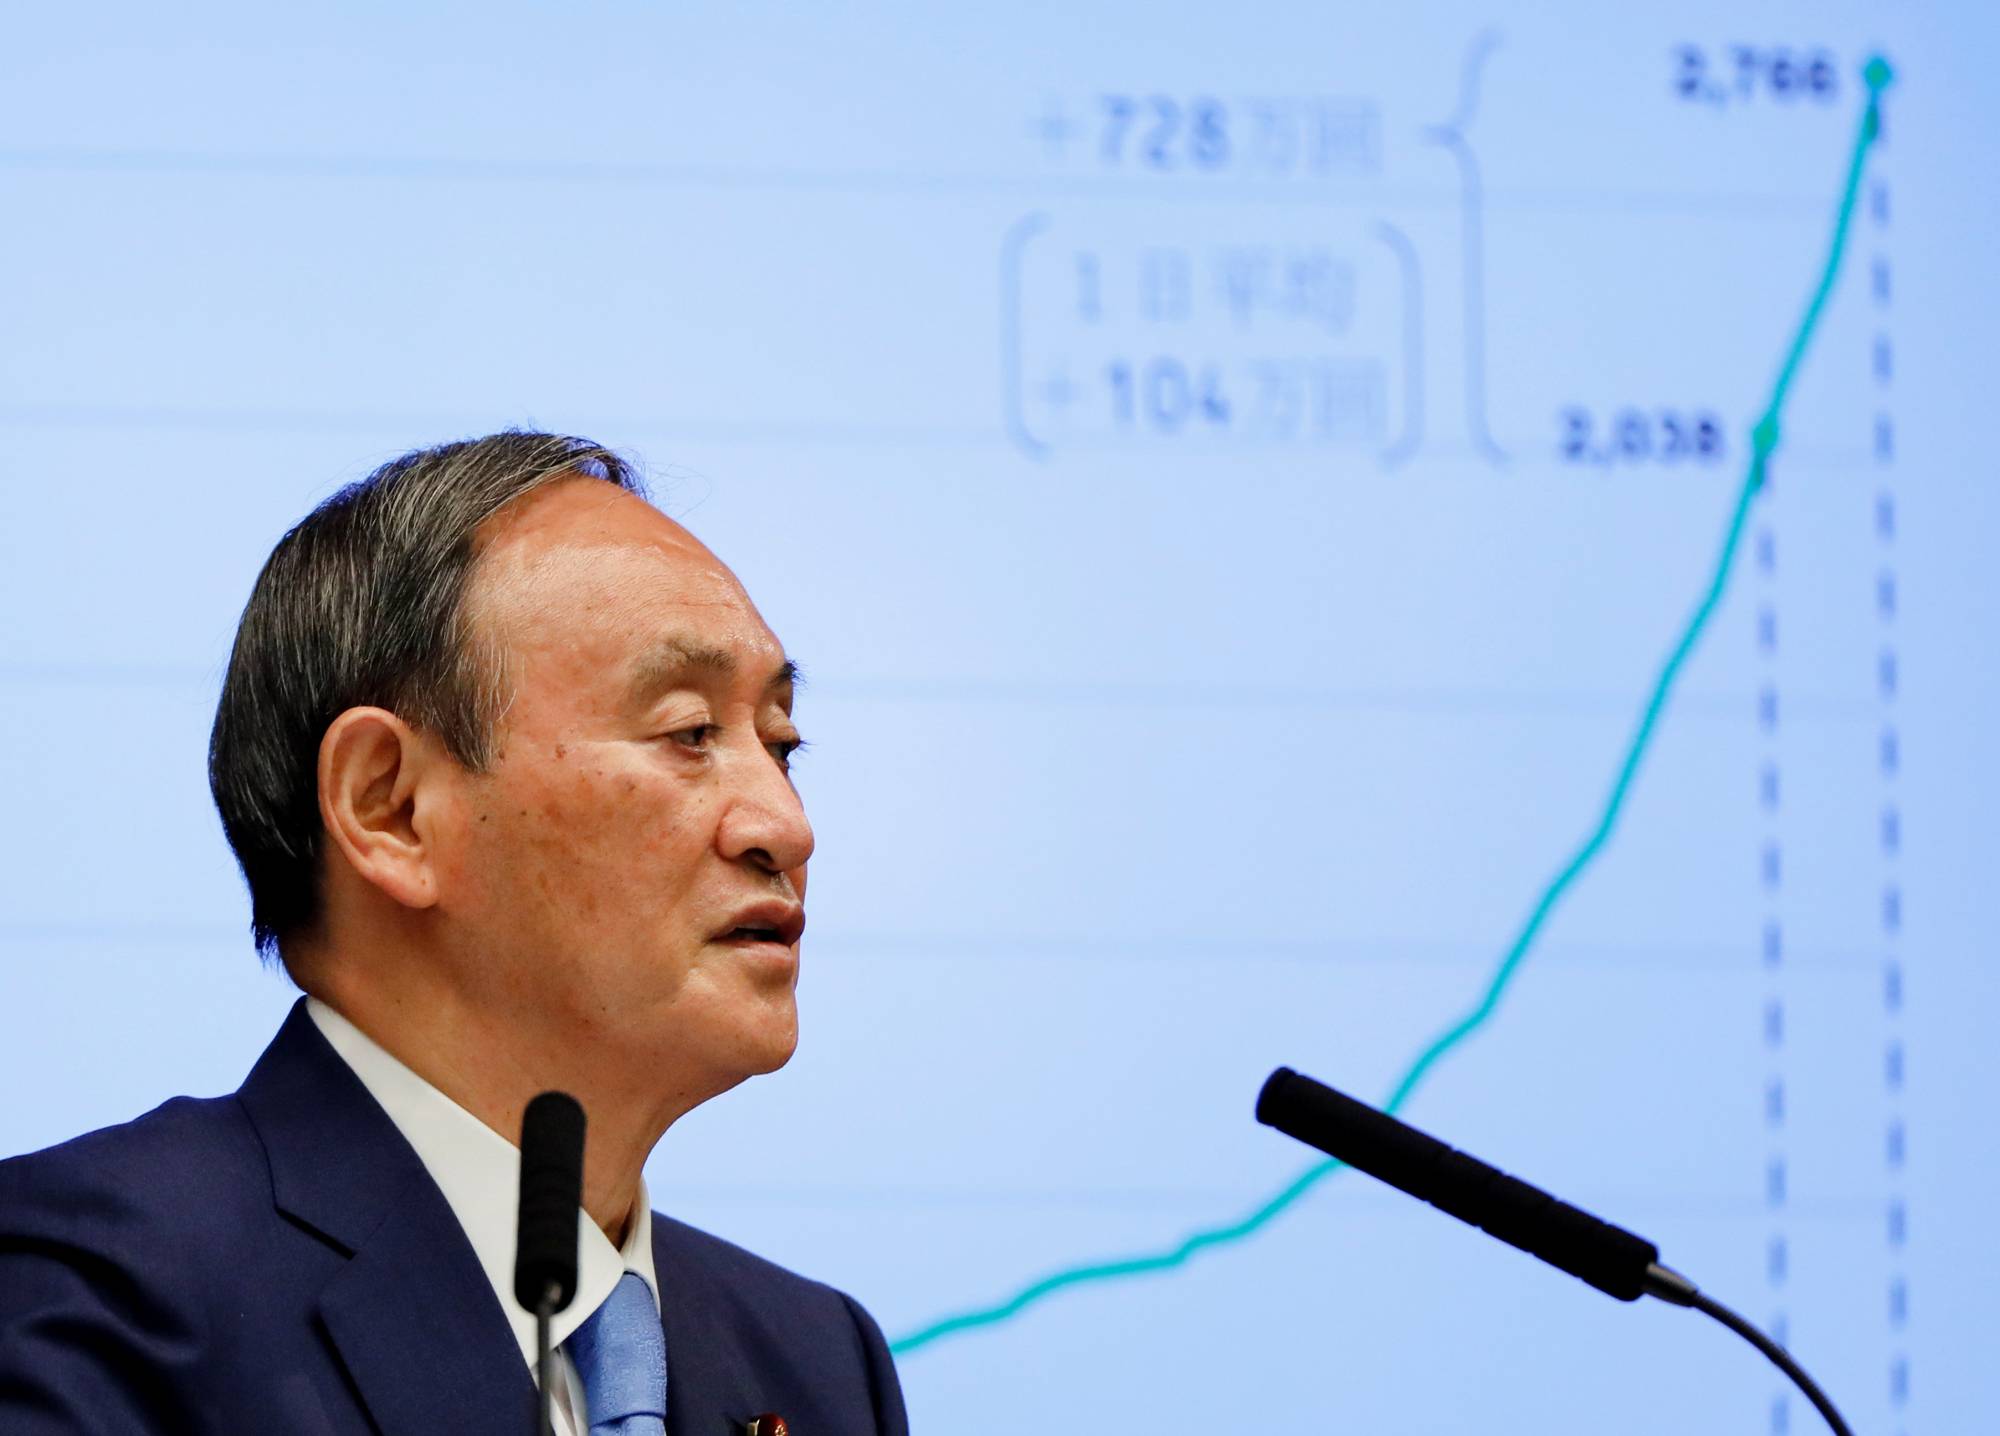 Prime Minister Yoshihide Suga holds a news conference on Japan's response to the COVID-19 outbreak in Tokyo on Thursday. | POOL / VIA REUTERS